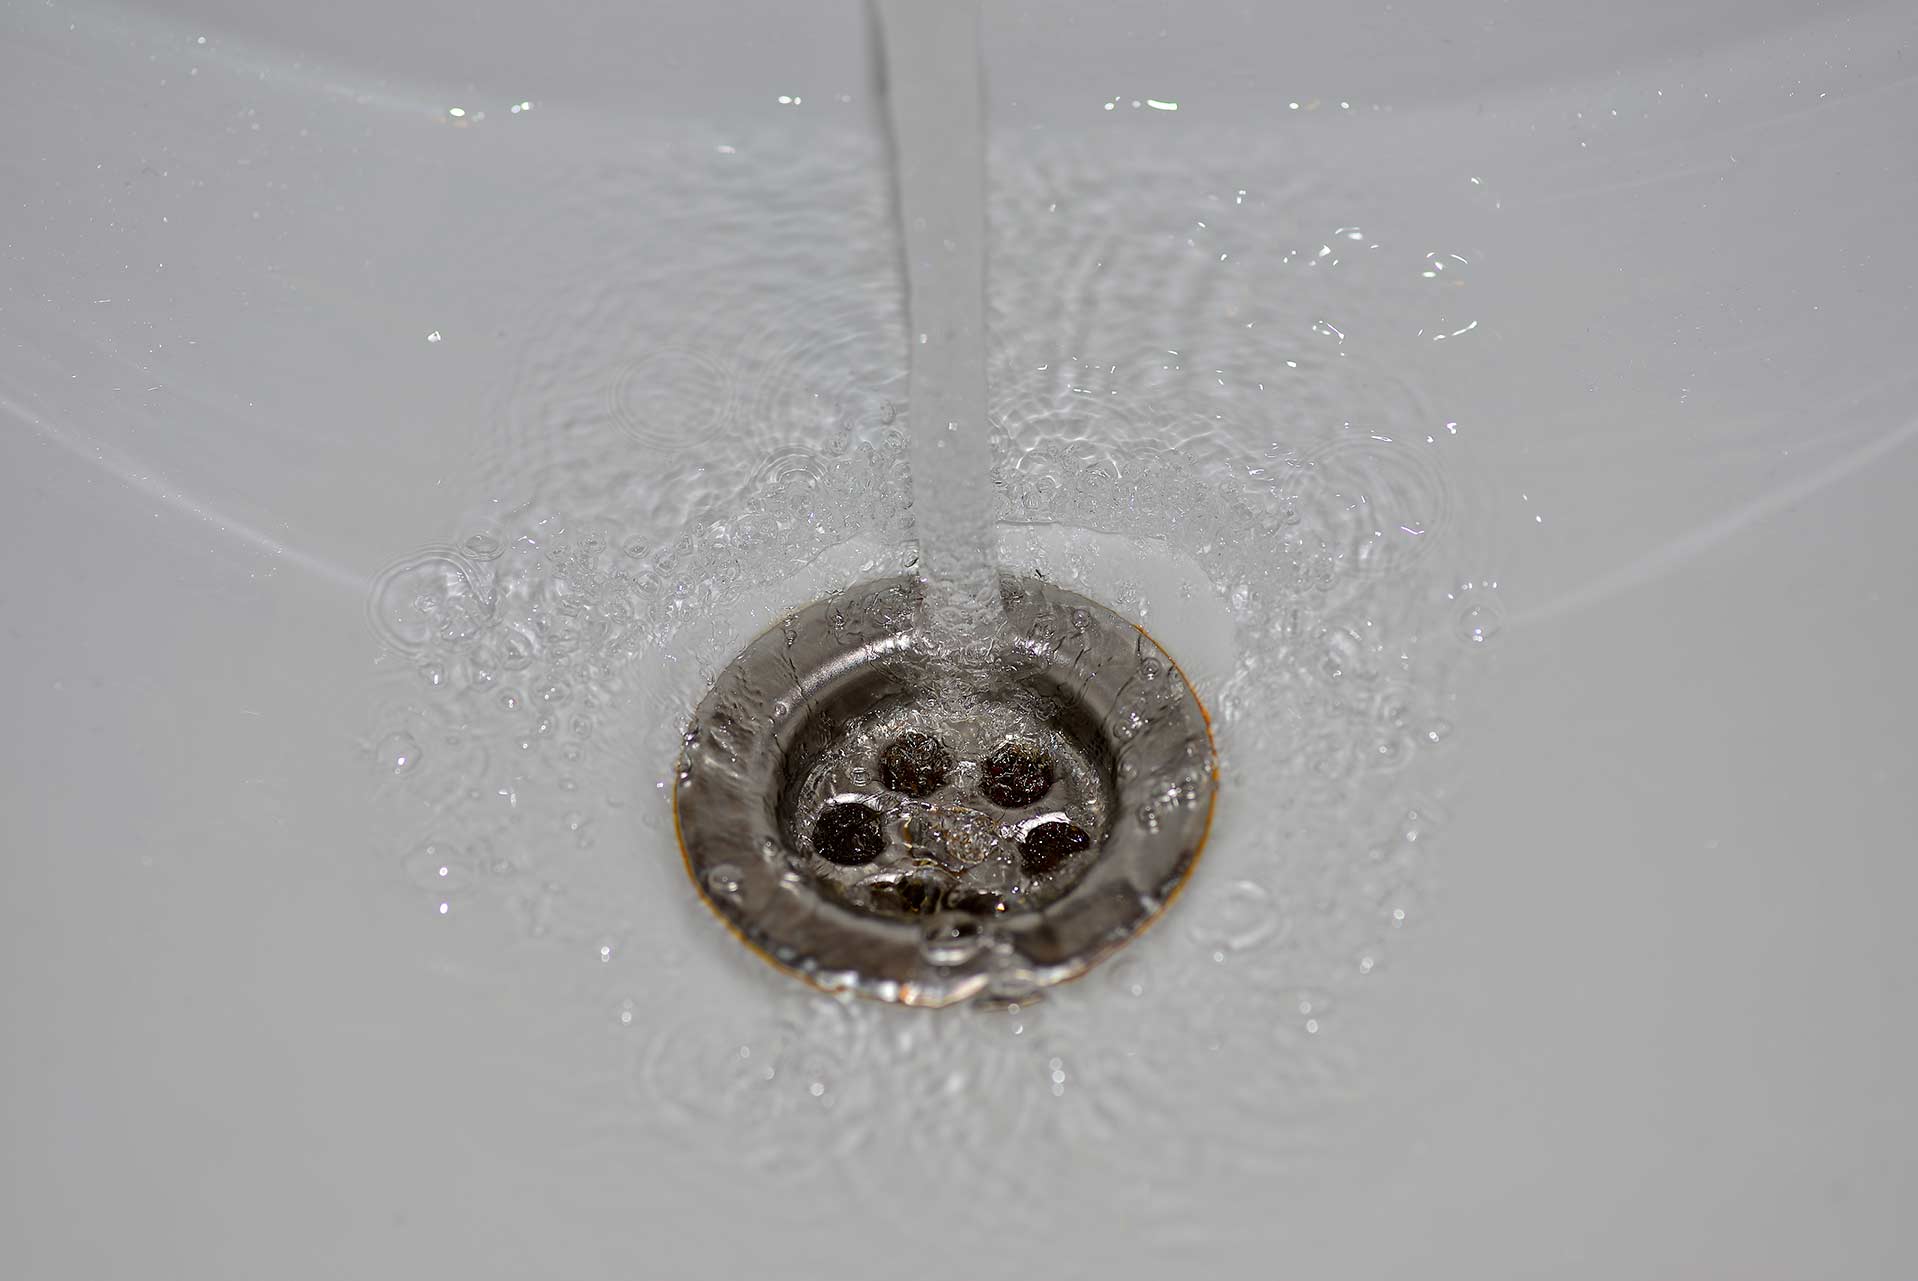 A2B Drains provides services to unblock blocked sinks and drains for properties in Sedgley.